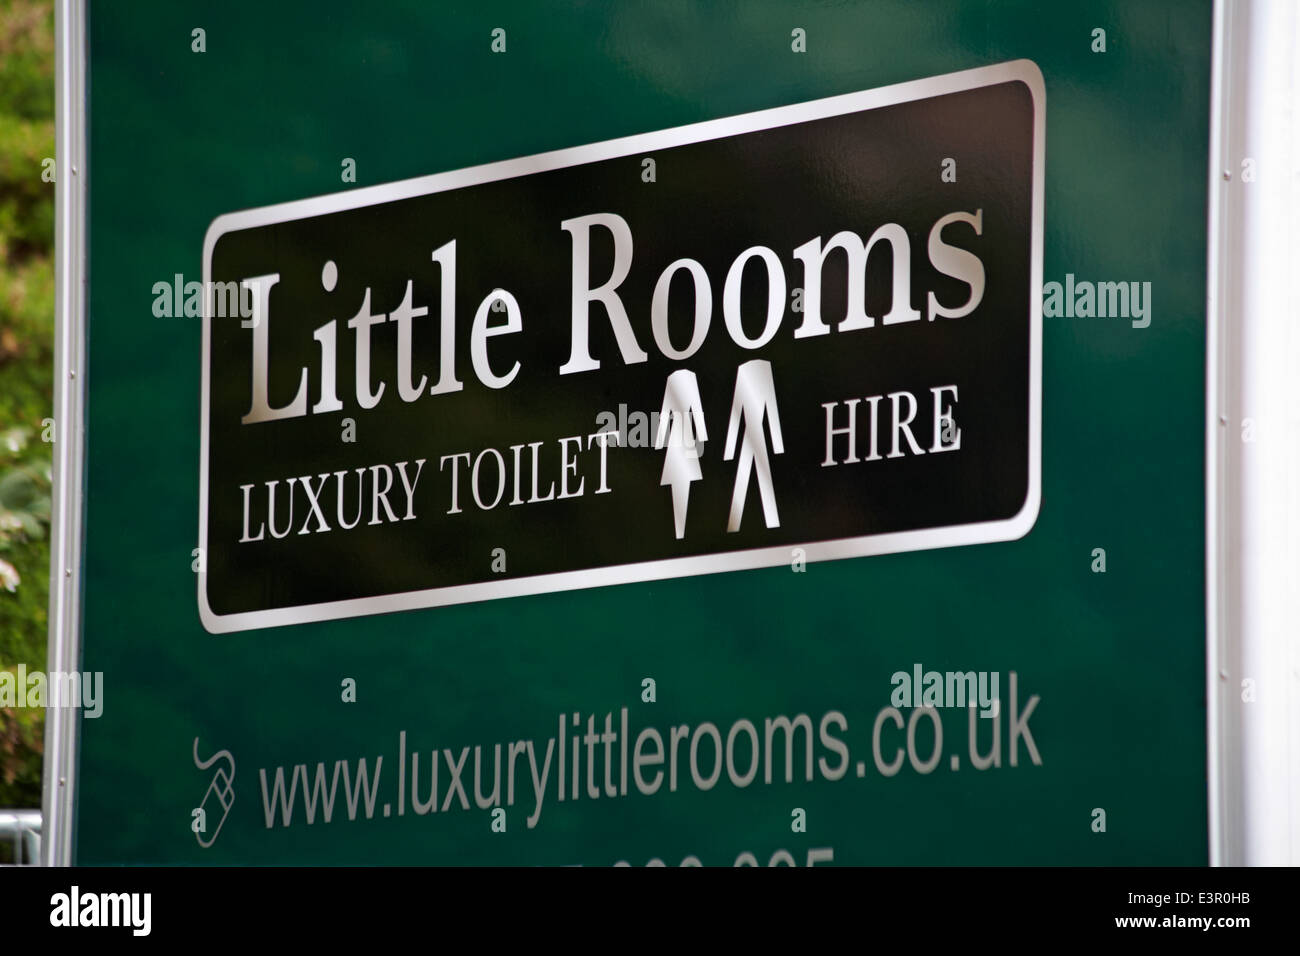 Little rooms luxury toilet hire - sign on portable toilets at Bournemouth promenade for wedding parties - Bournemouth, Dorset UK Stock Photo